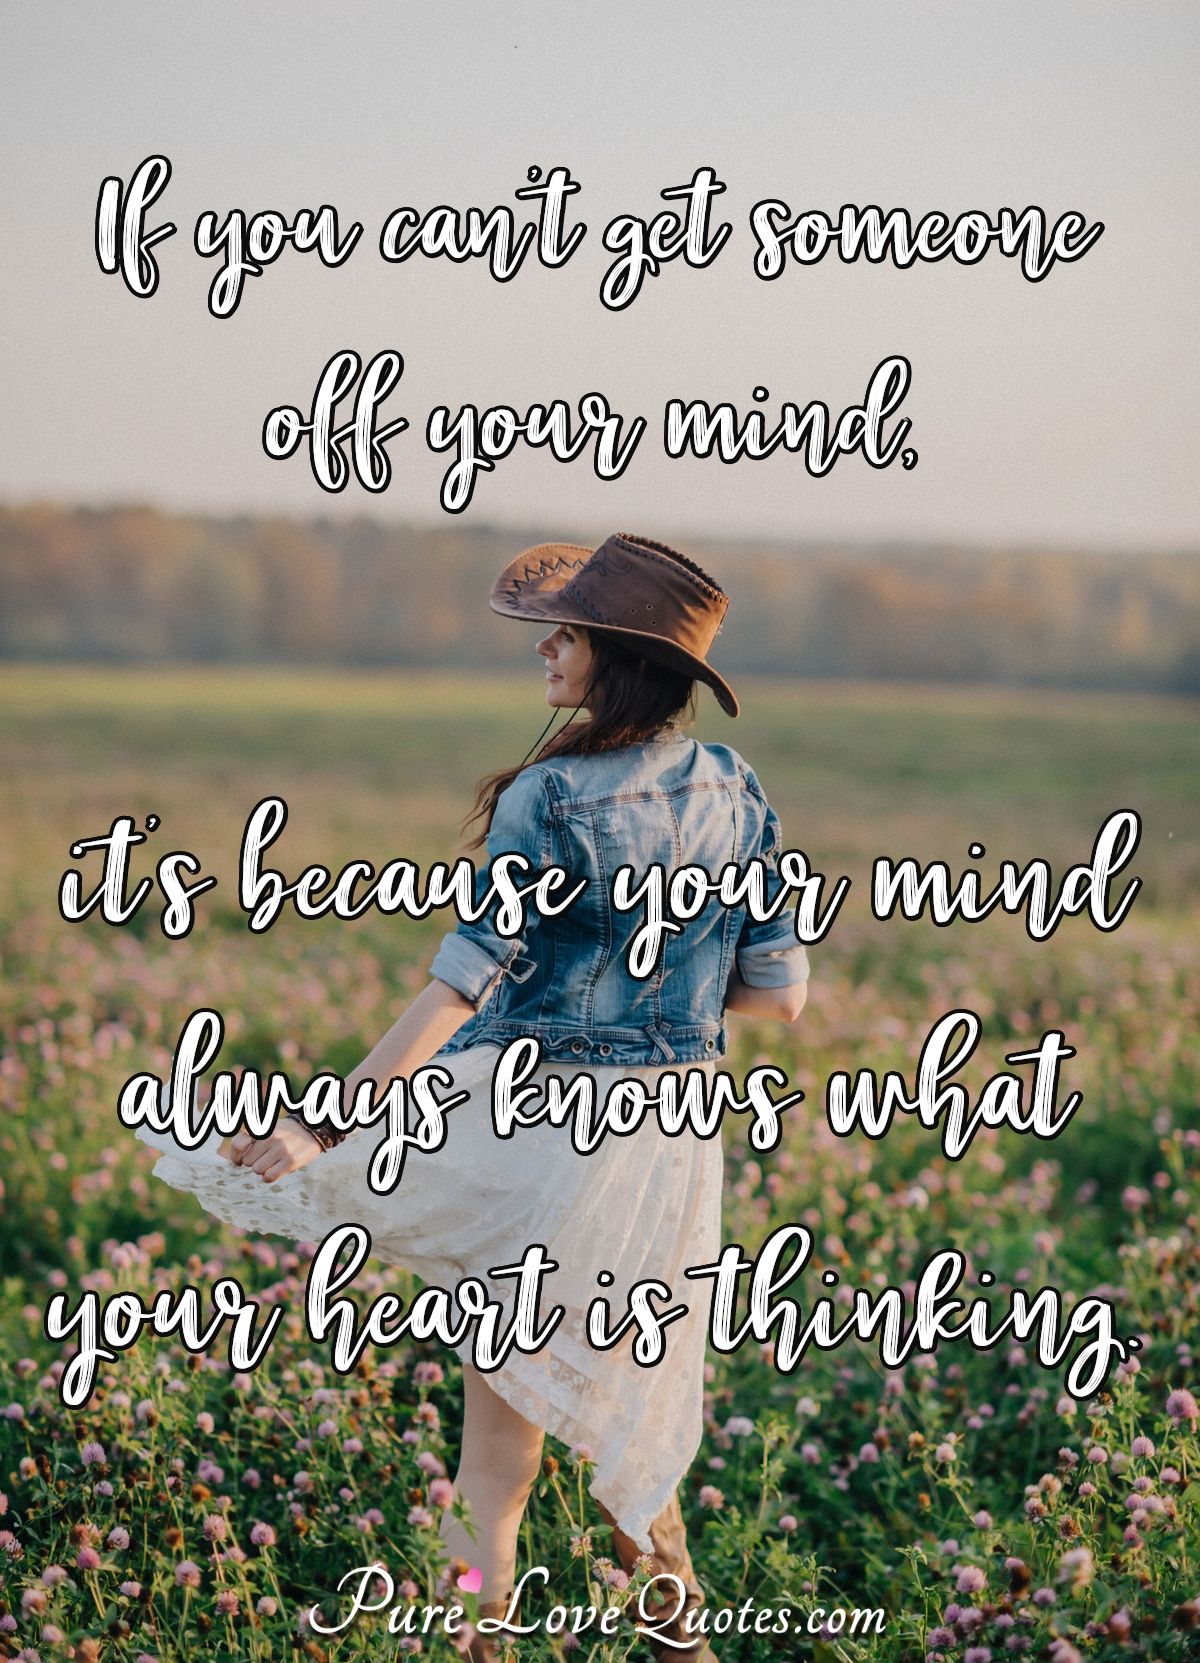 If you can't get someone off your mind, it's because your mind always knows what your heart is thinking. - Anonymous